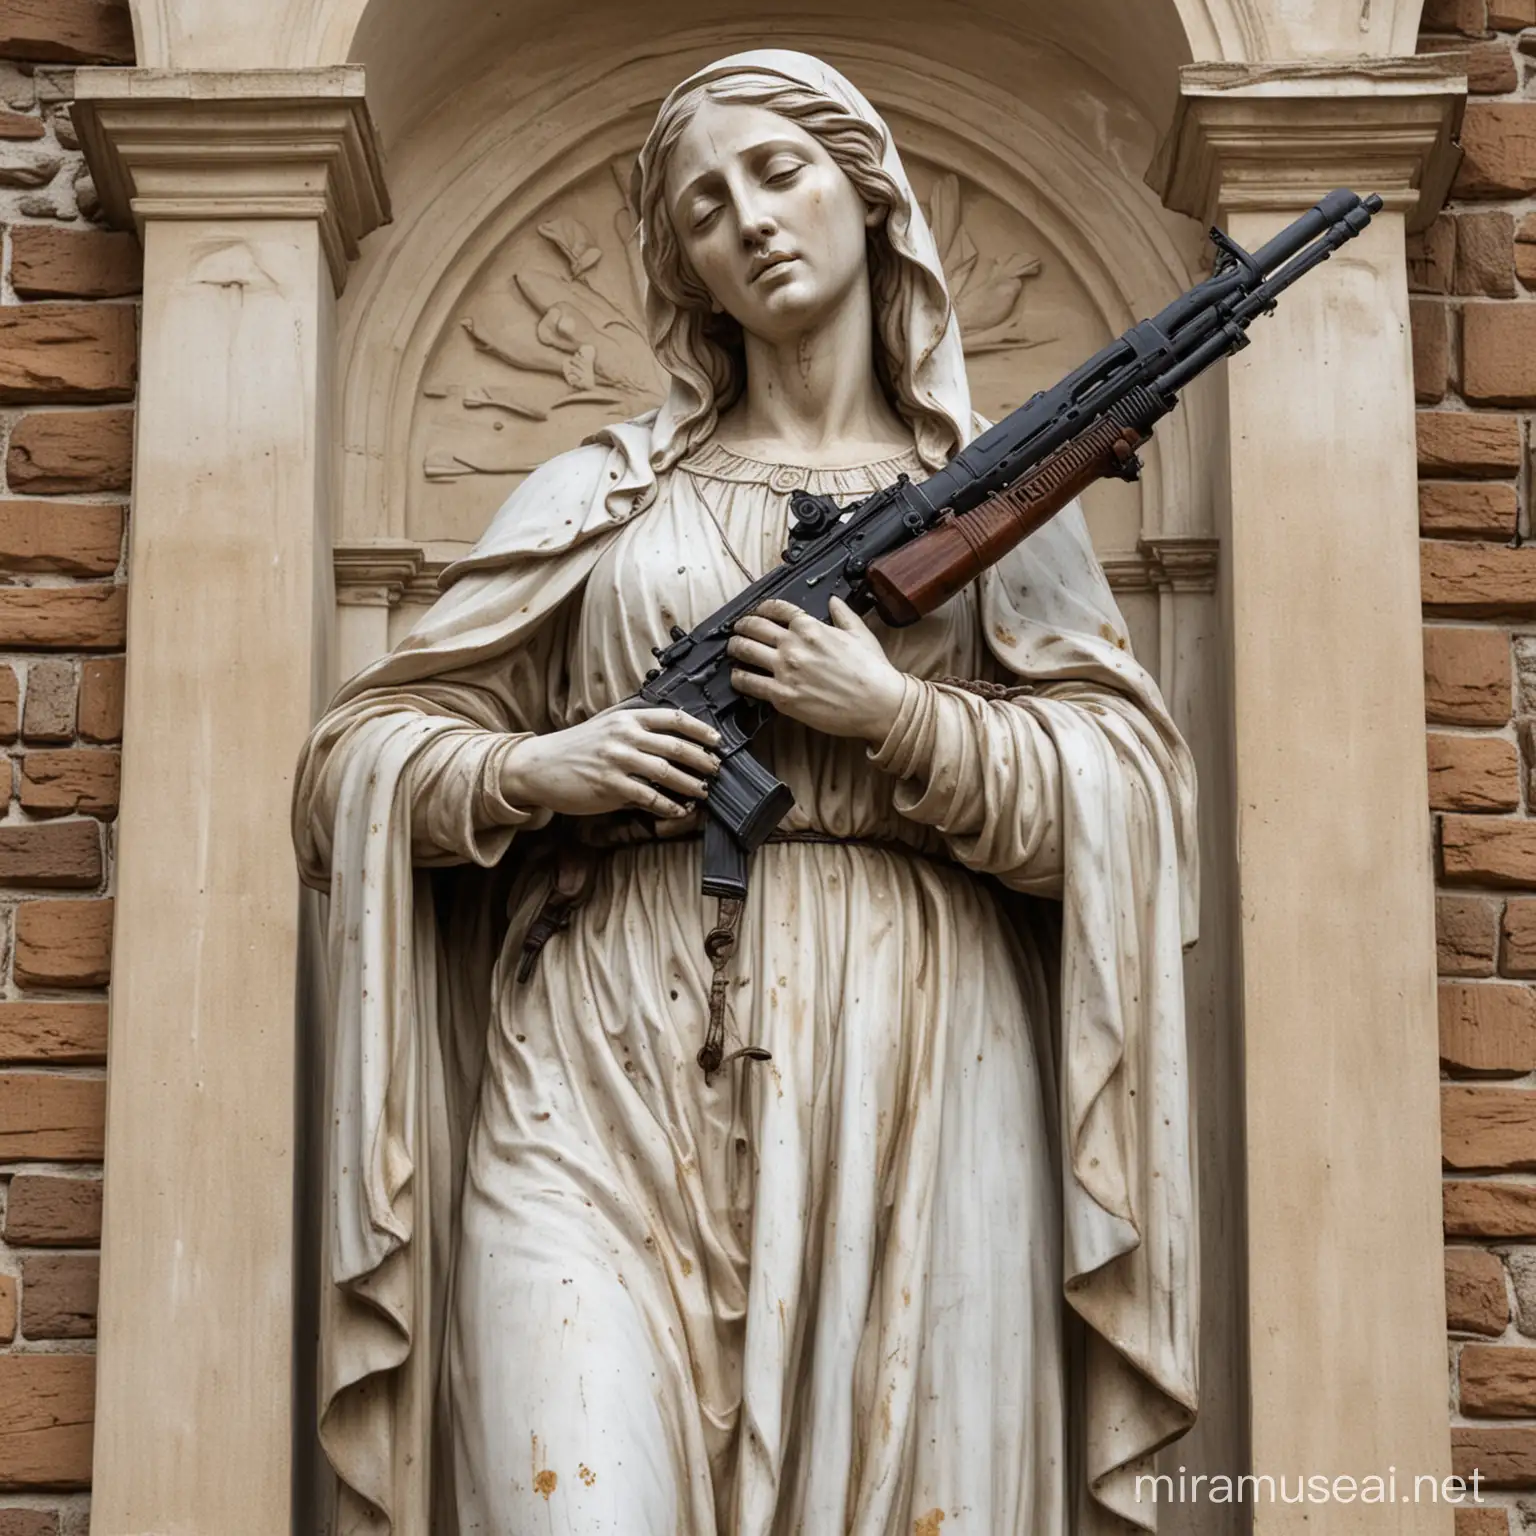 Statue of the Weeping Madonna Holding Rifles